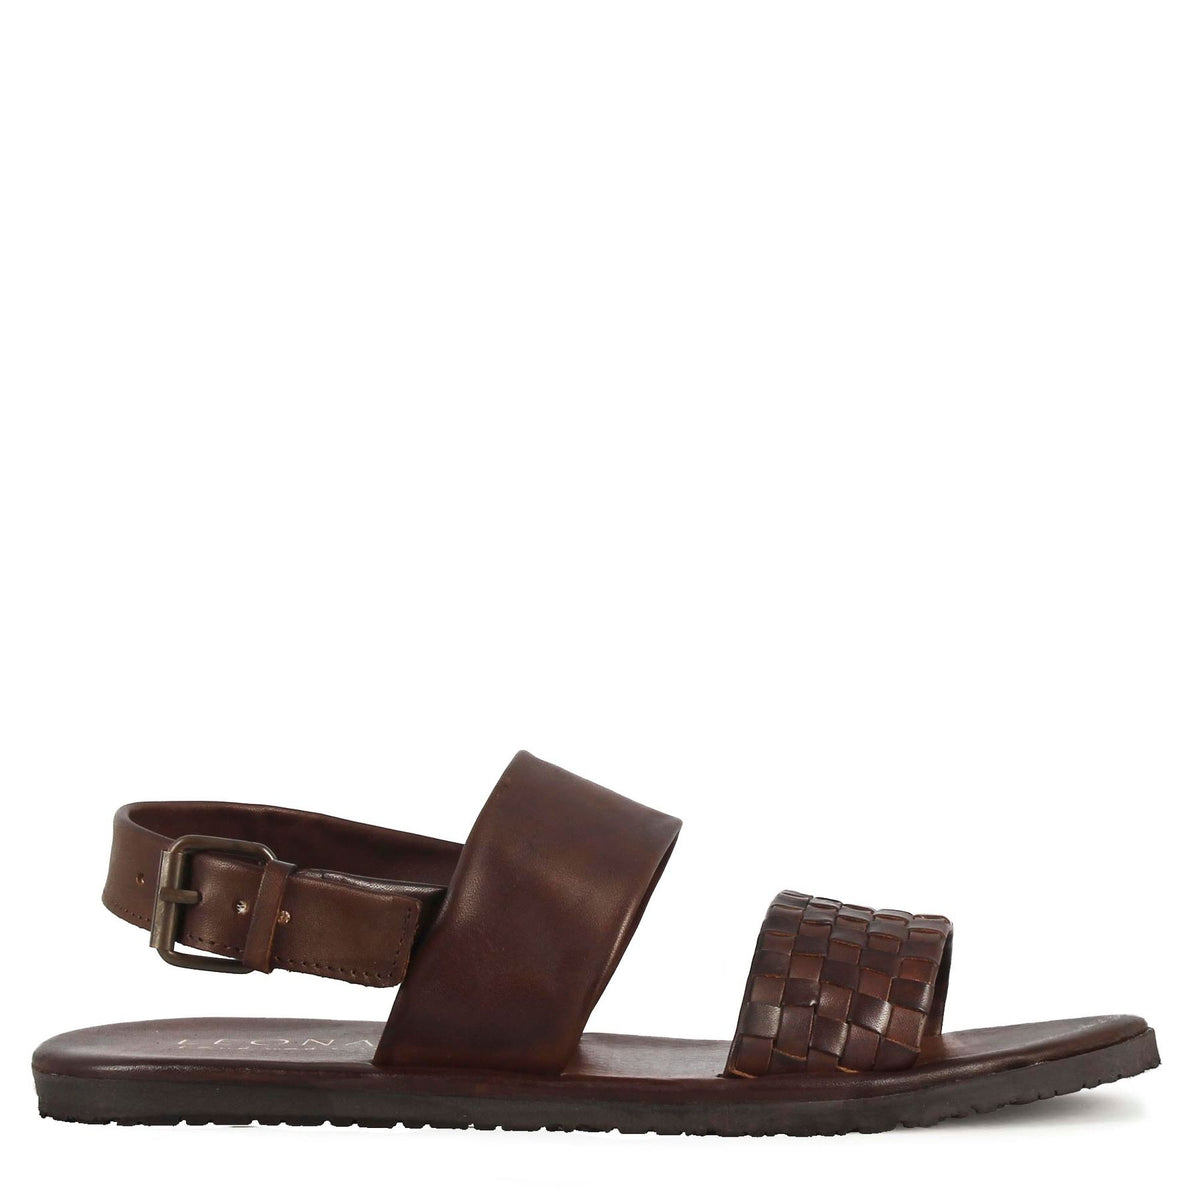 Men's sandal with brown semi-braided leather buckle